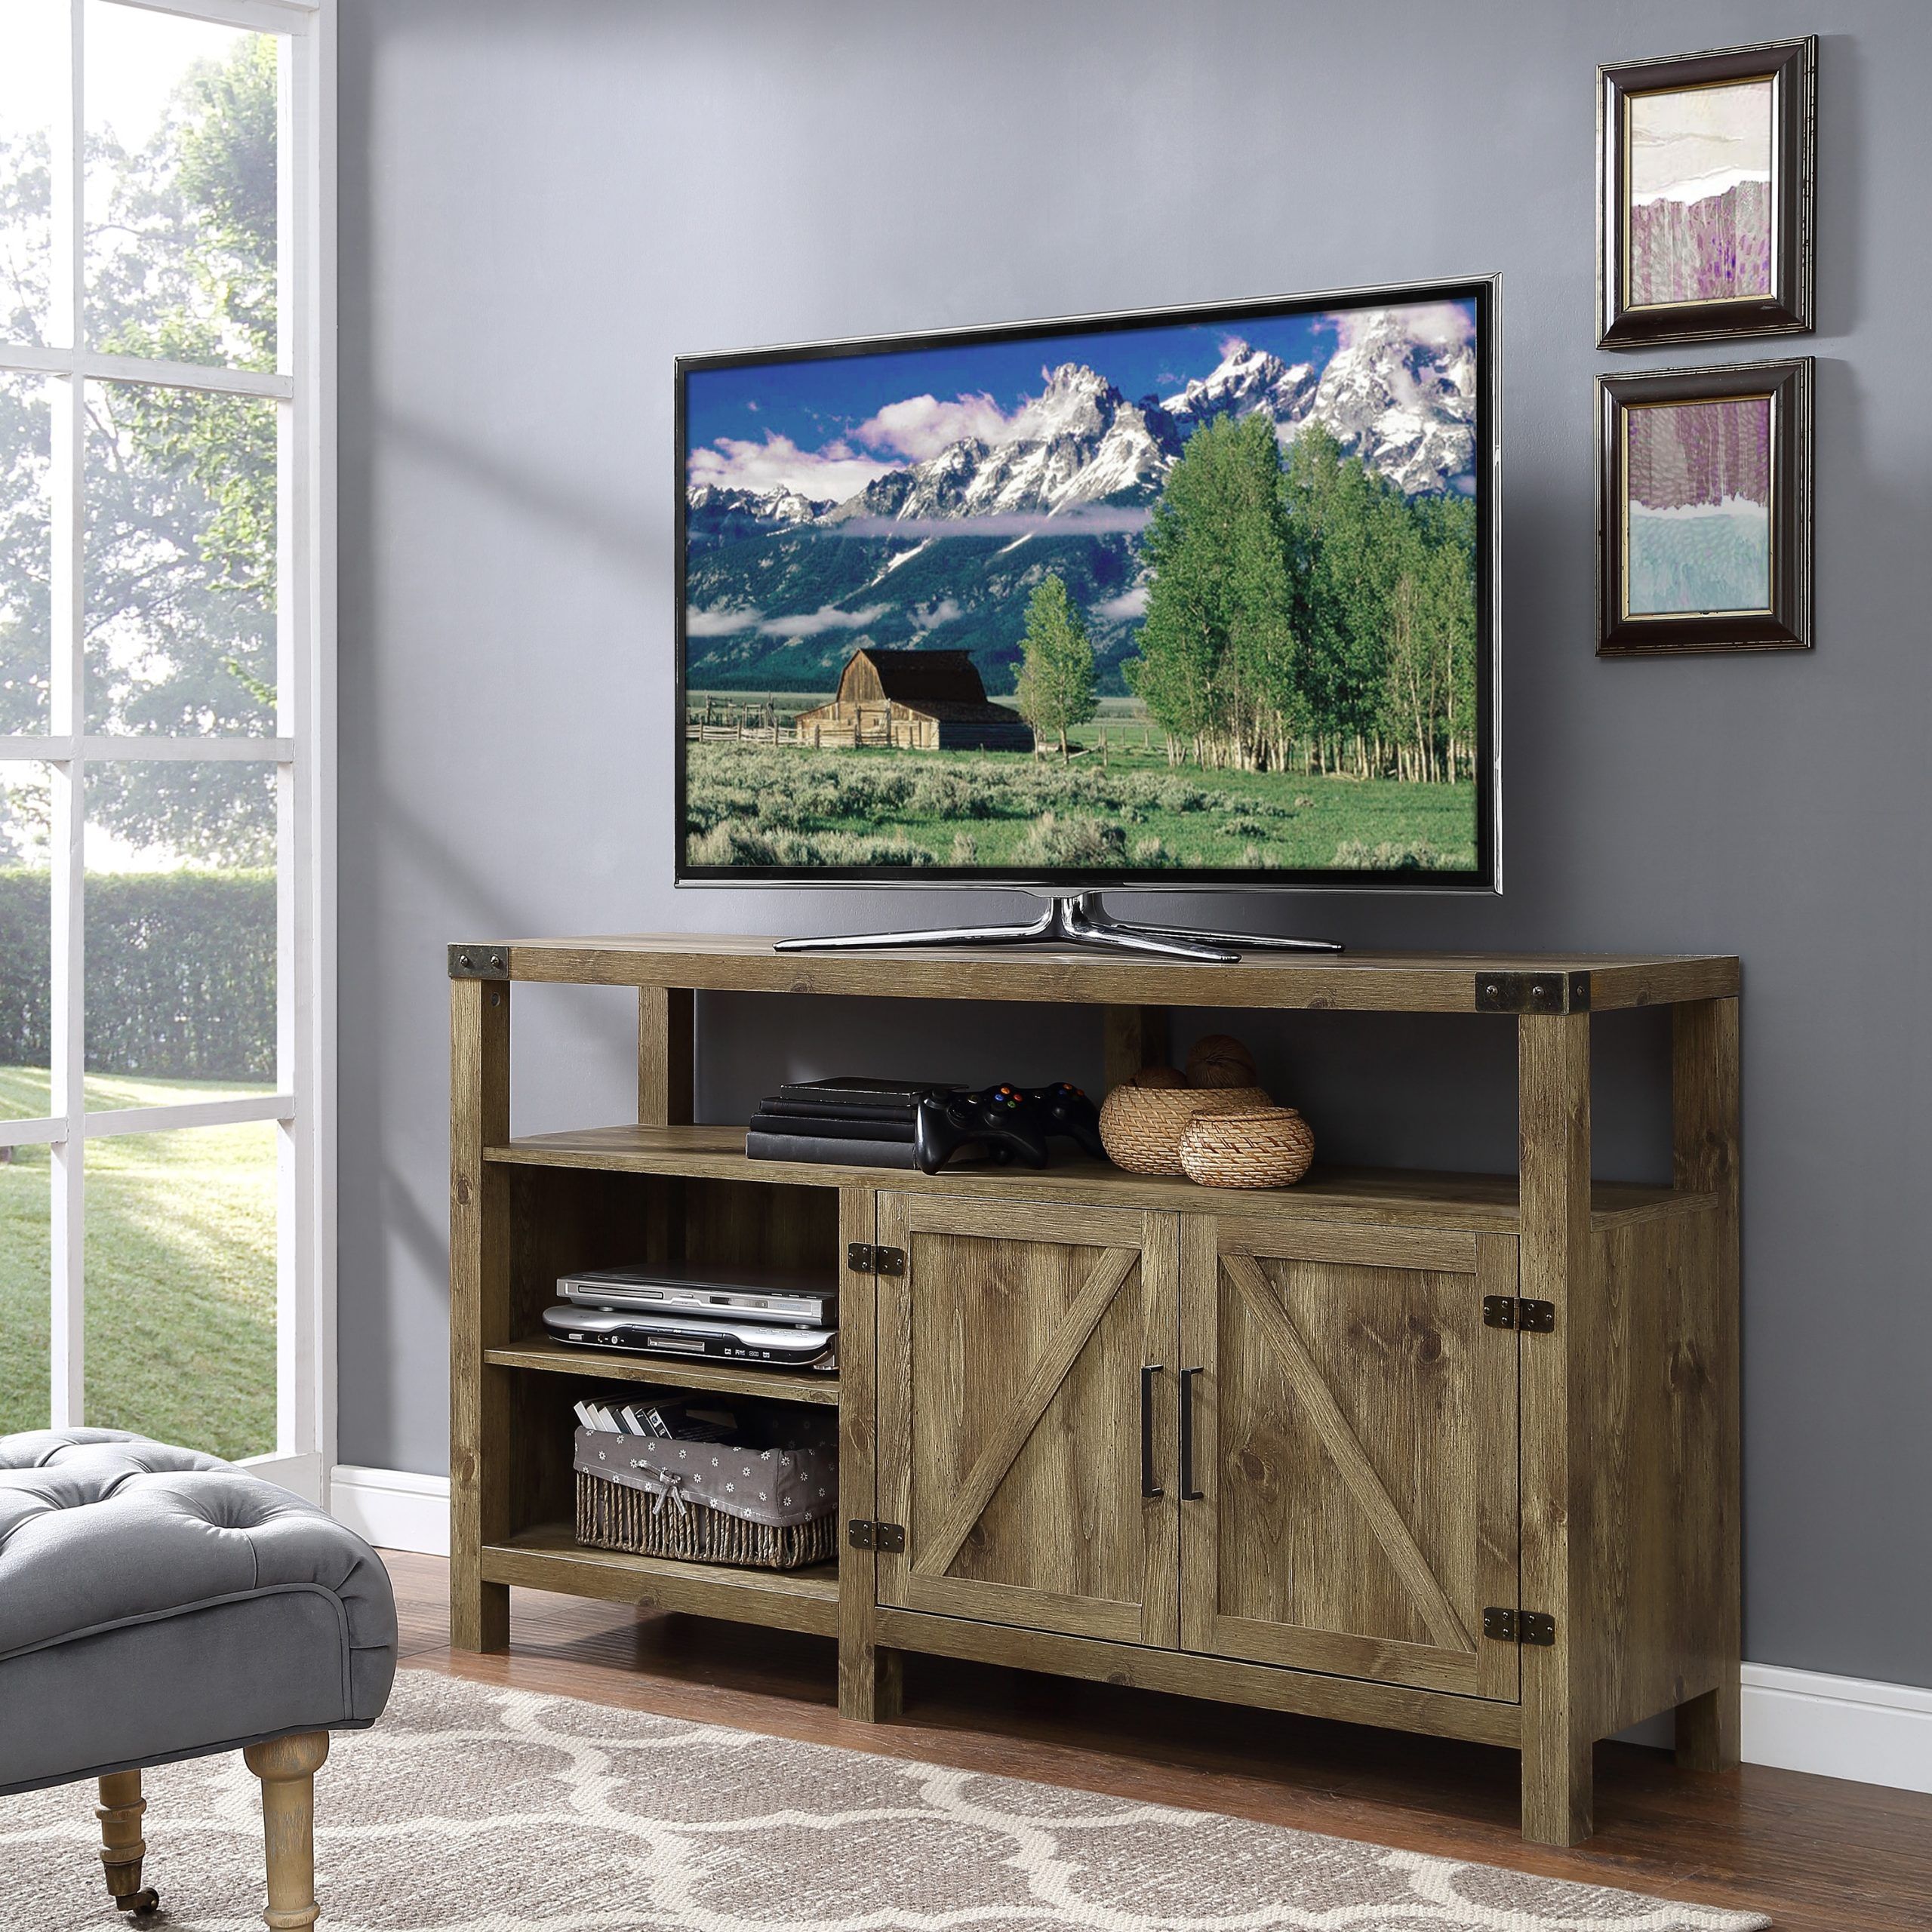 Farmhouse Tv Stand 70 Inch White : Coastal Tv Stands Beach Tv Stands Throughout Farmhouse Tv Stands For 70 Inch Tv (View 14 of 20)